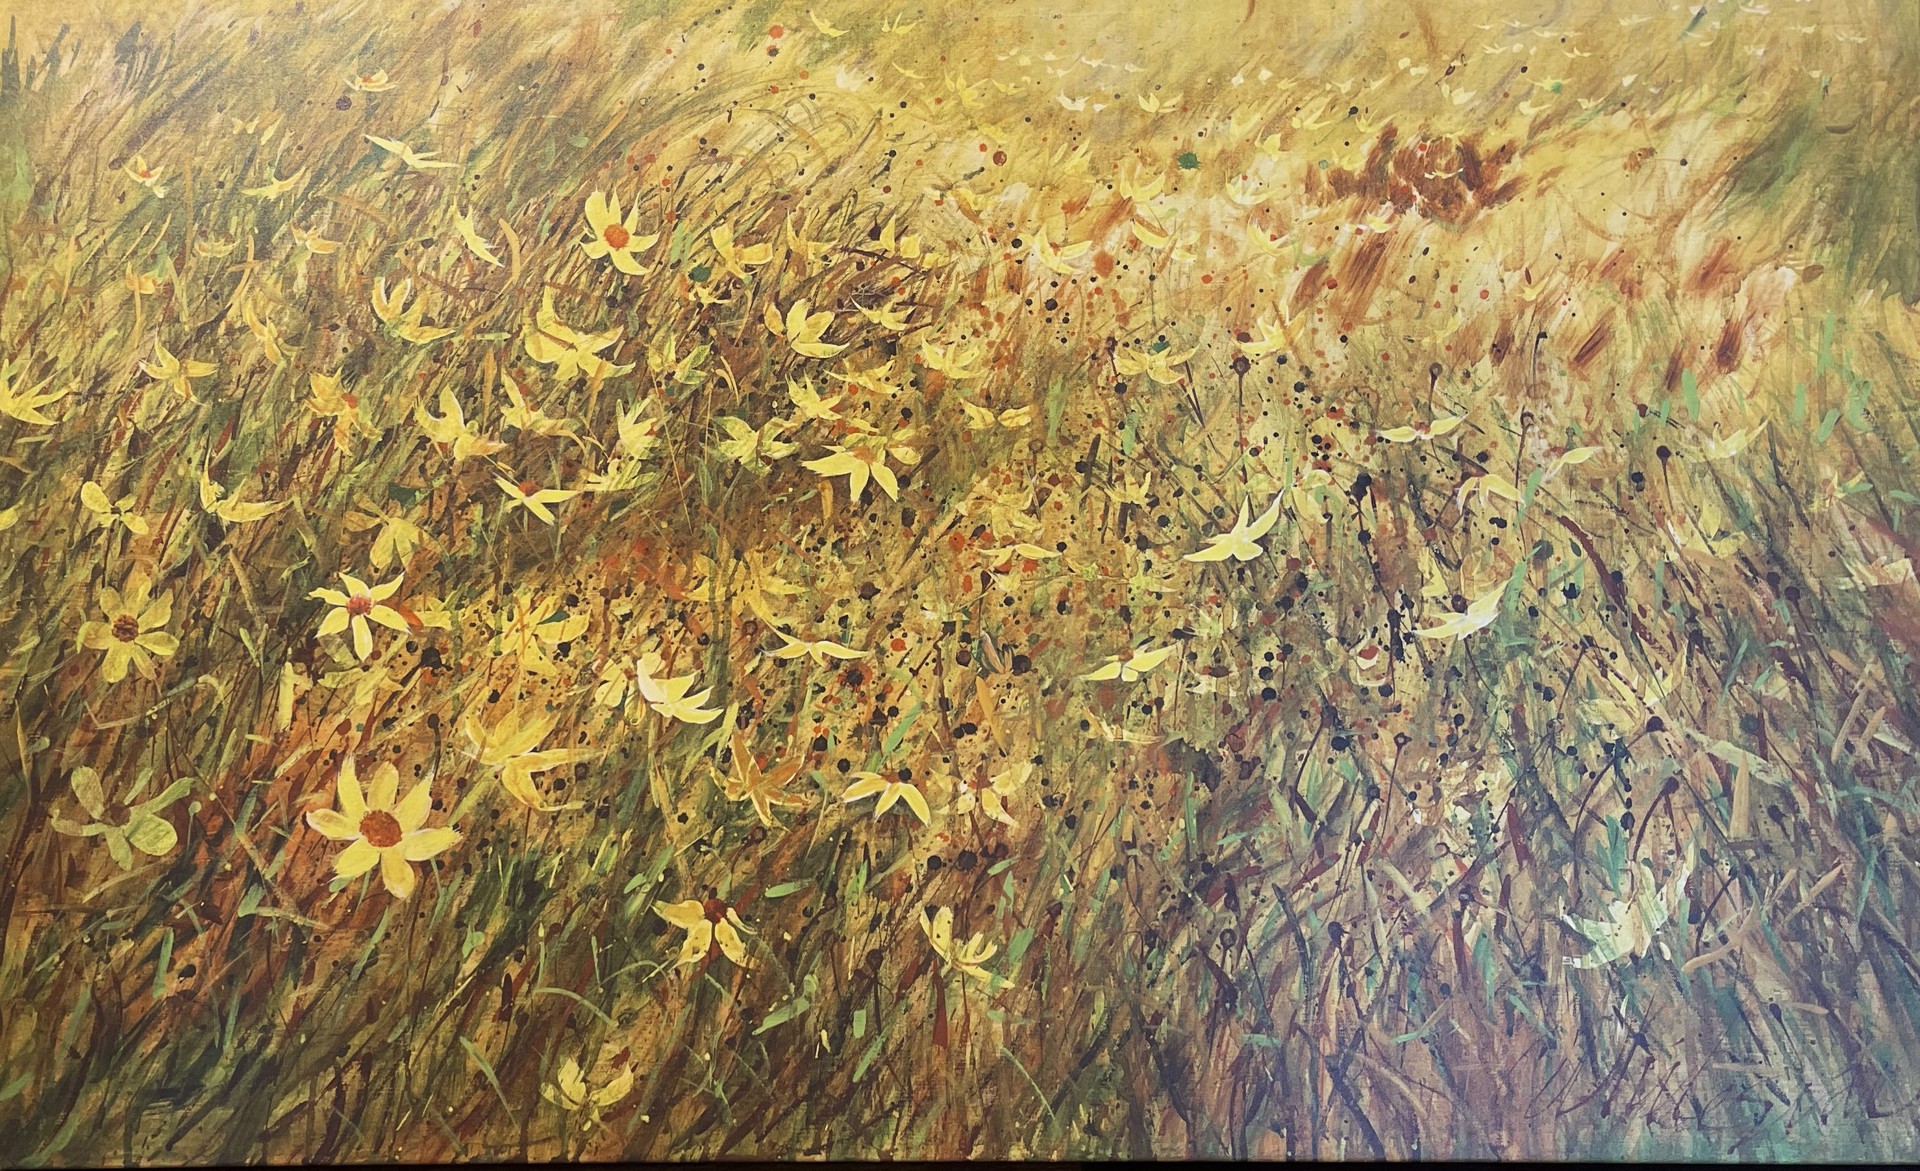 Field of Susans by William A. Whiteside